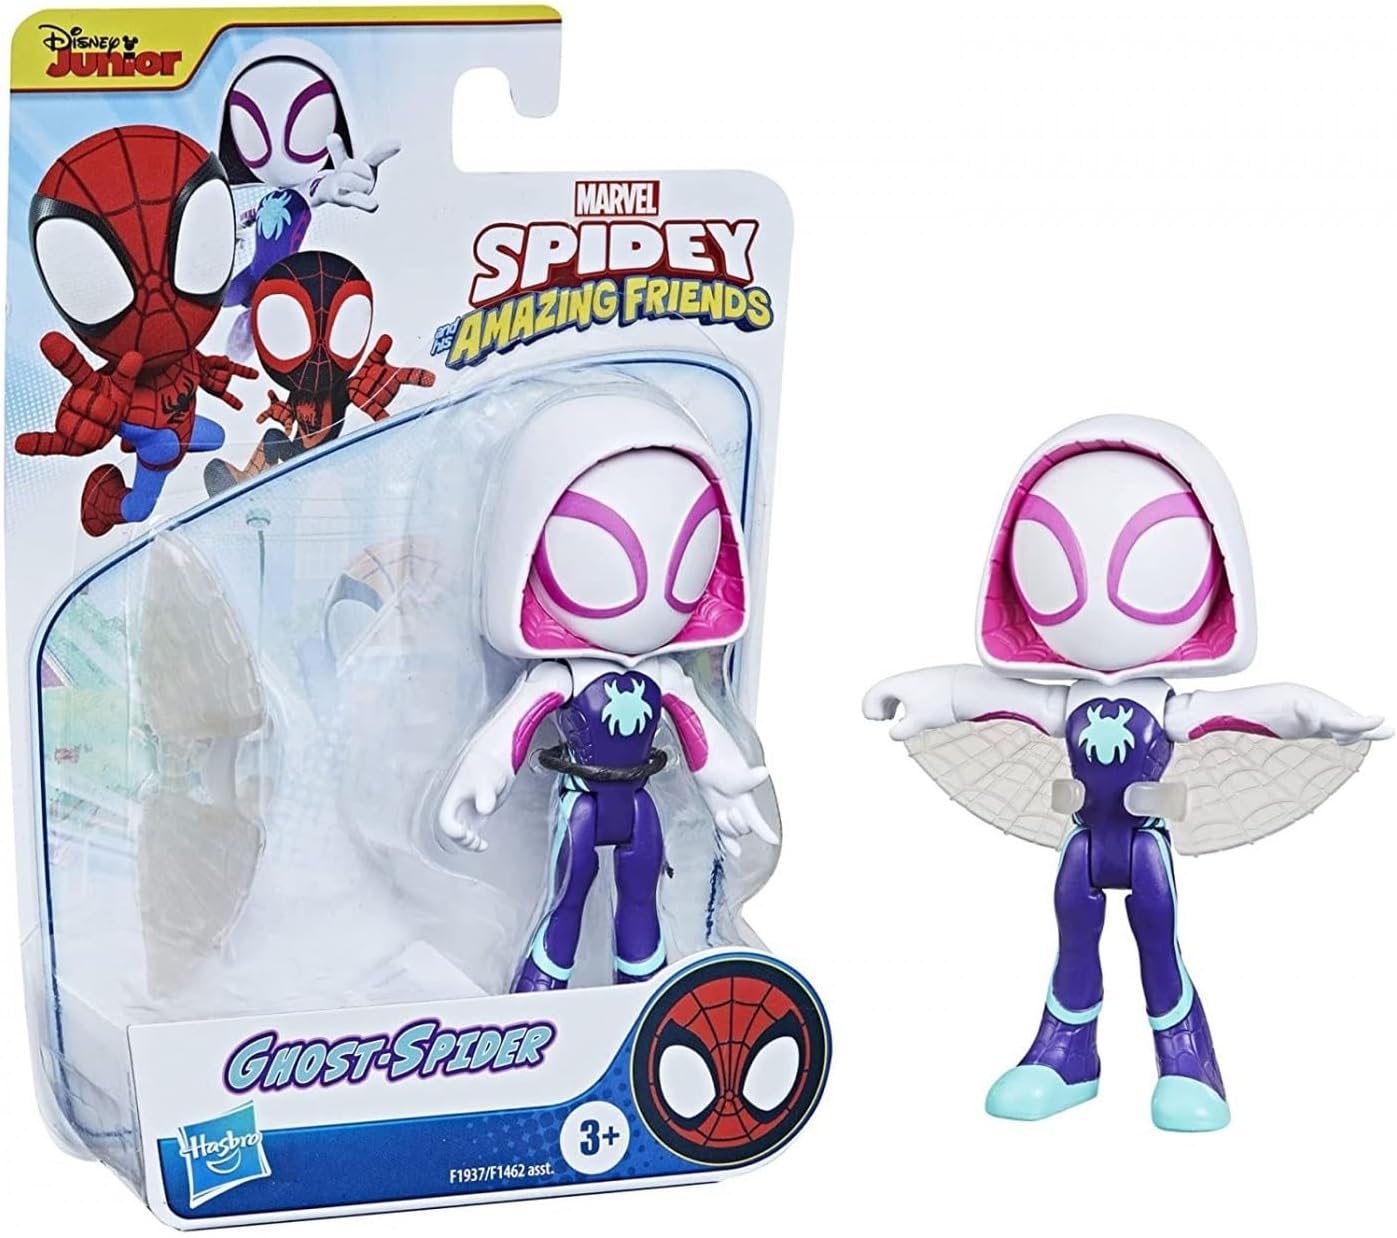 Spidey and His Amazing Friends Marvel Ghost-Spider Hero Figure, 4-Inch Scale Action Figure, Includes 1 Accessory, for Kids Ages 3 and Up